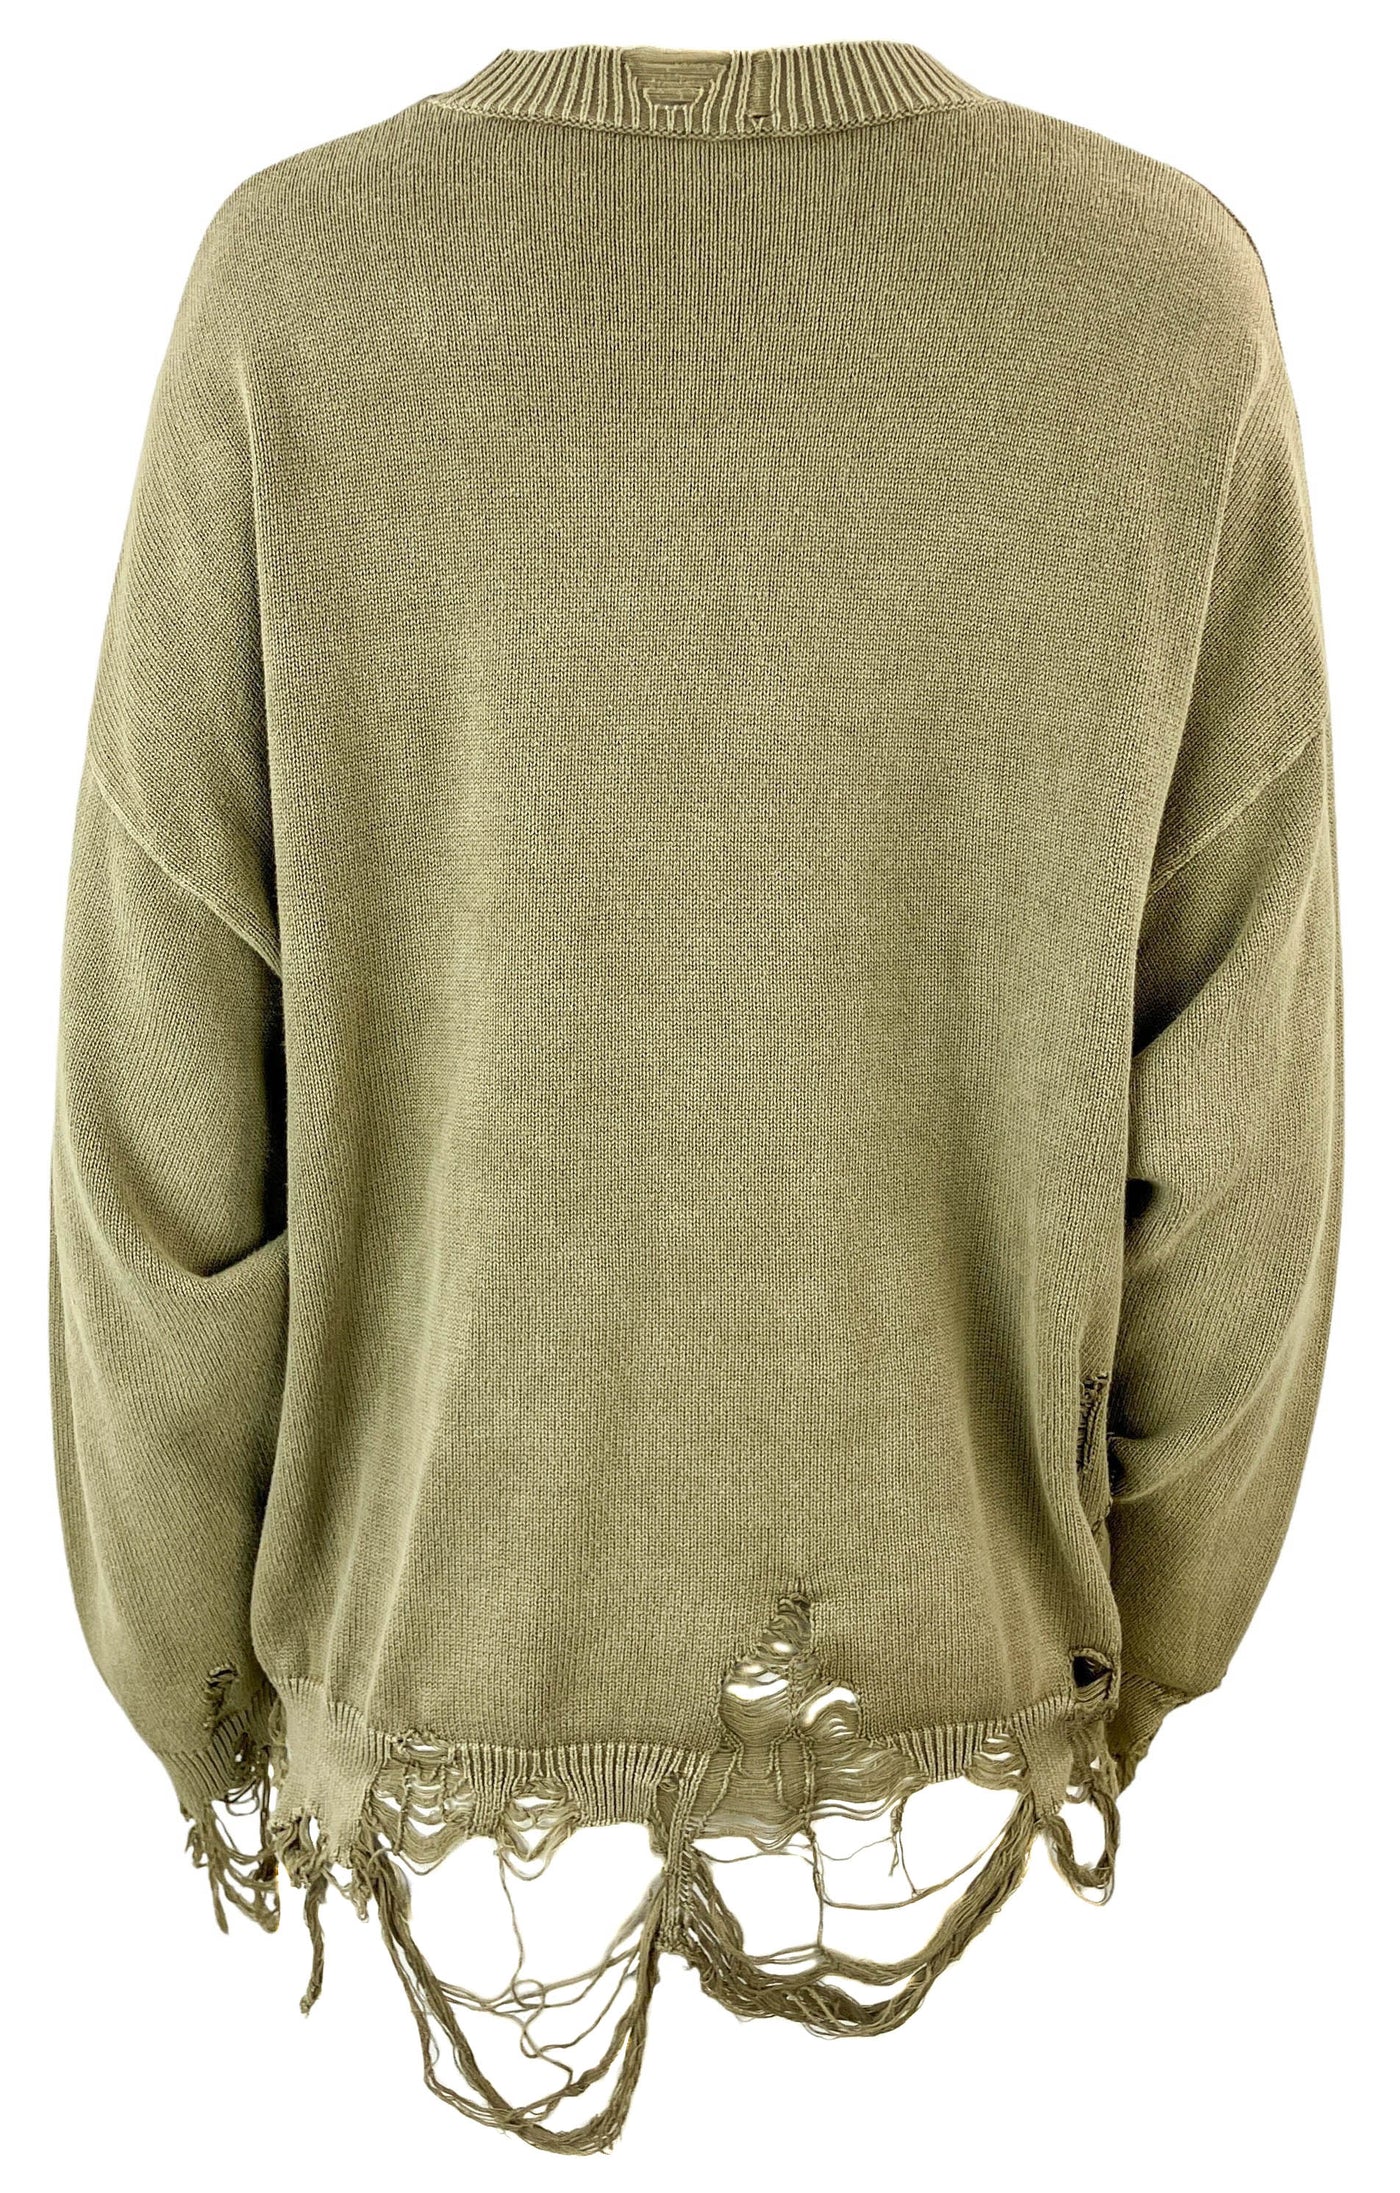 R13 Destroyed Oversized Pullover in Beige - Discounts on R13 at UAL